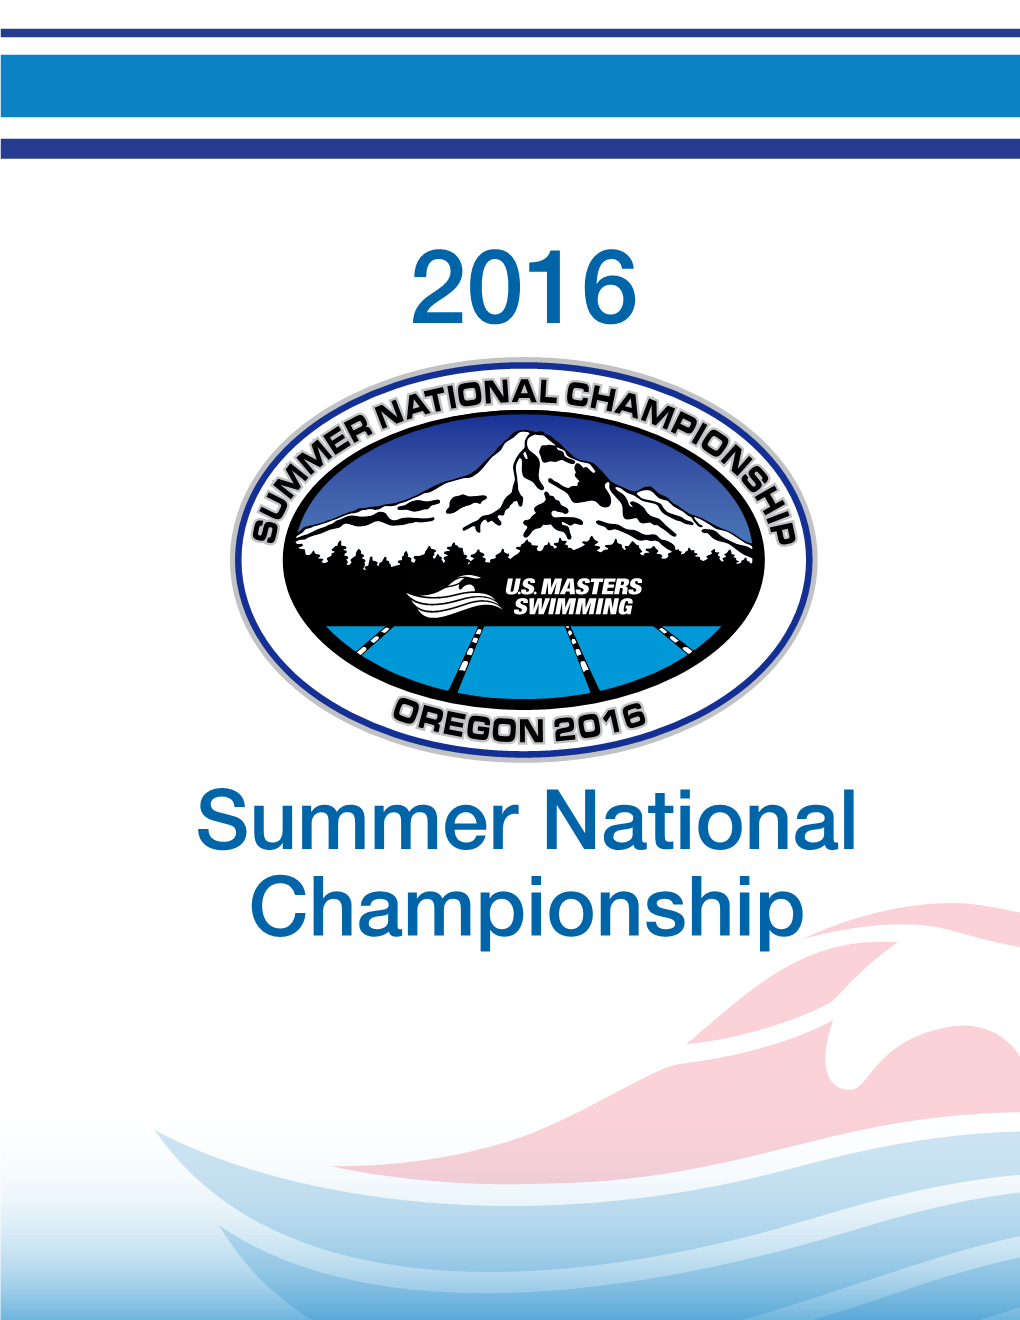 Summer National Championship Welcome to Oregon!